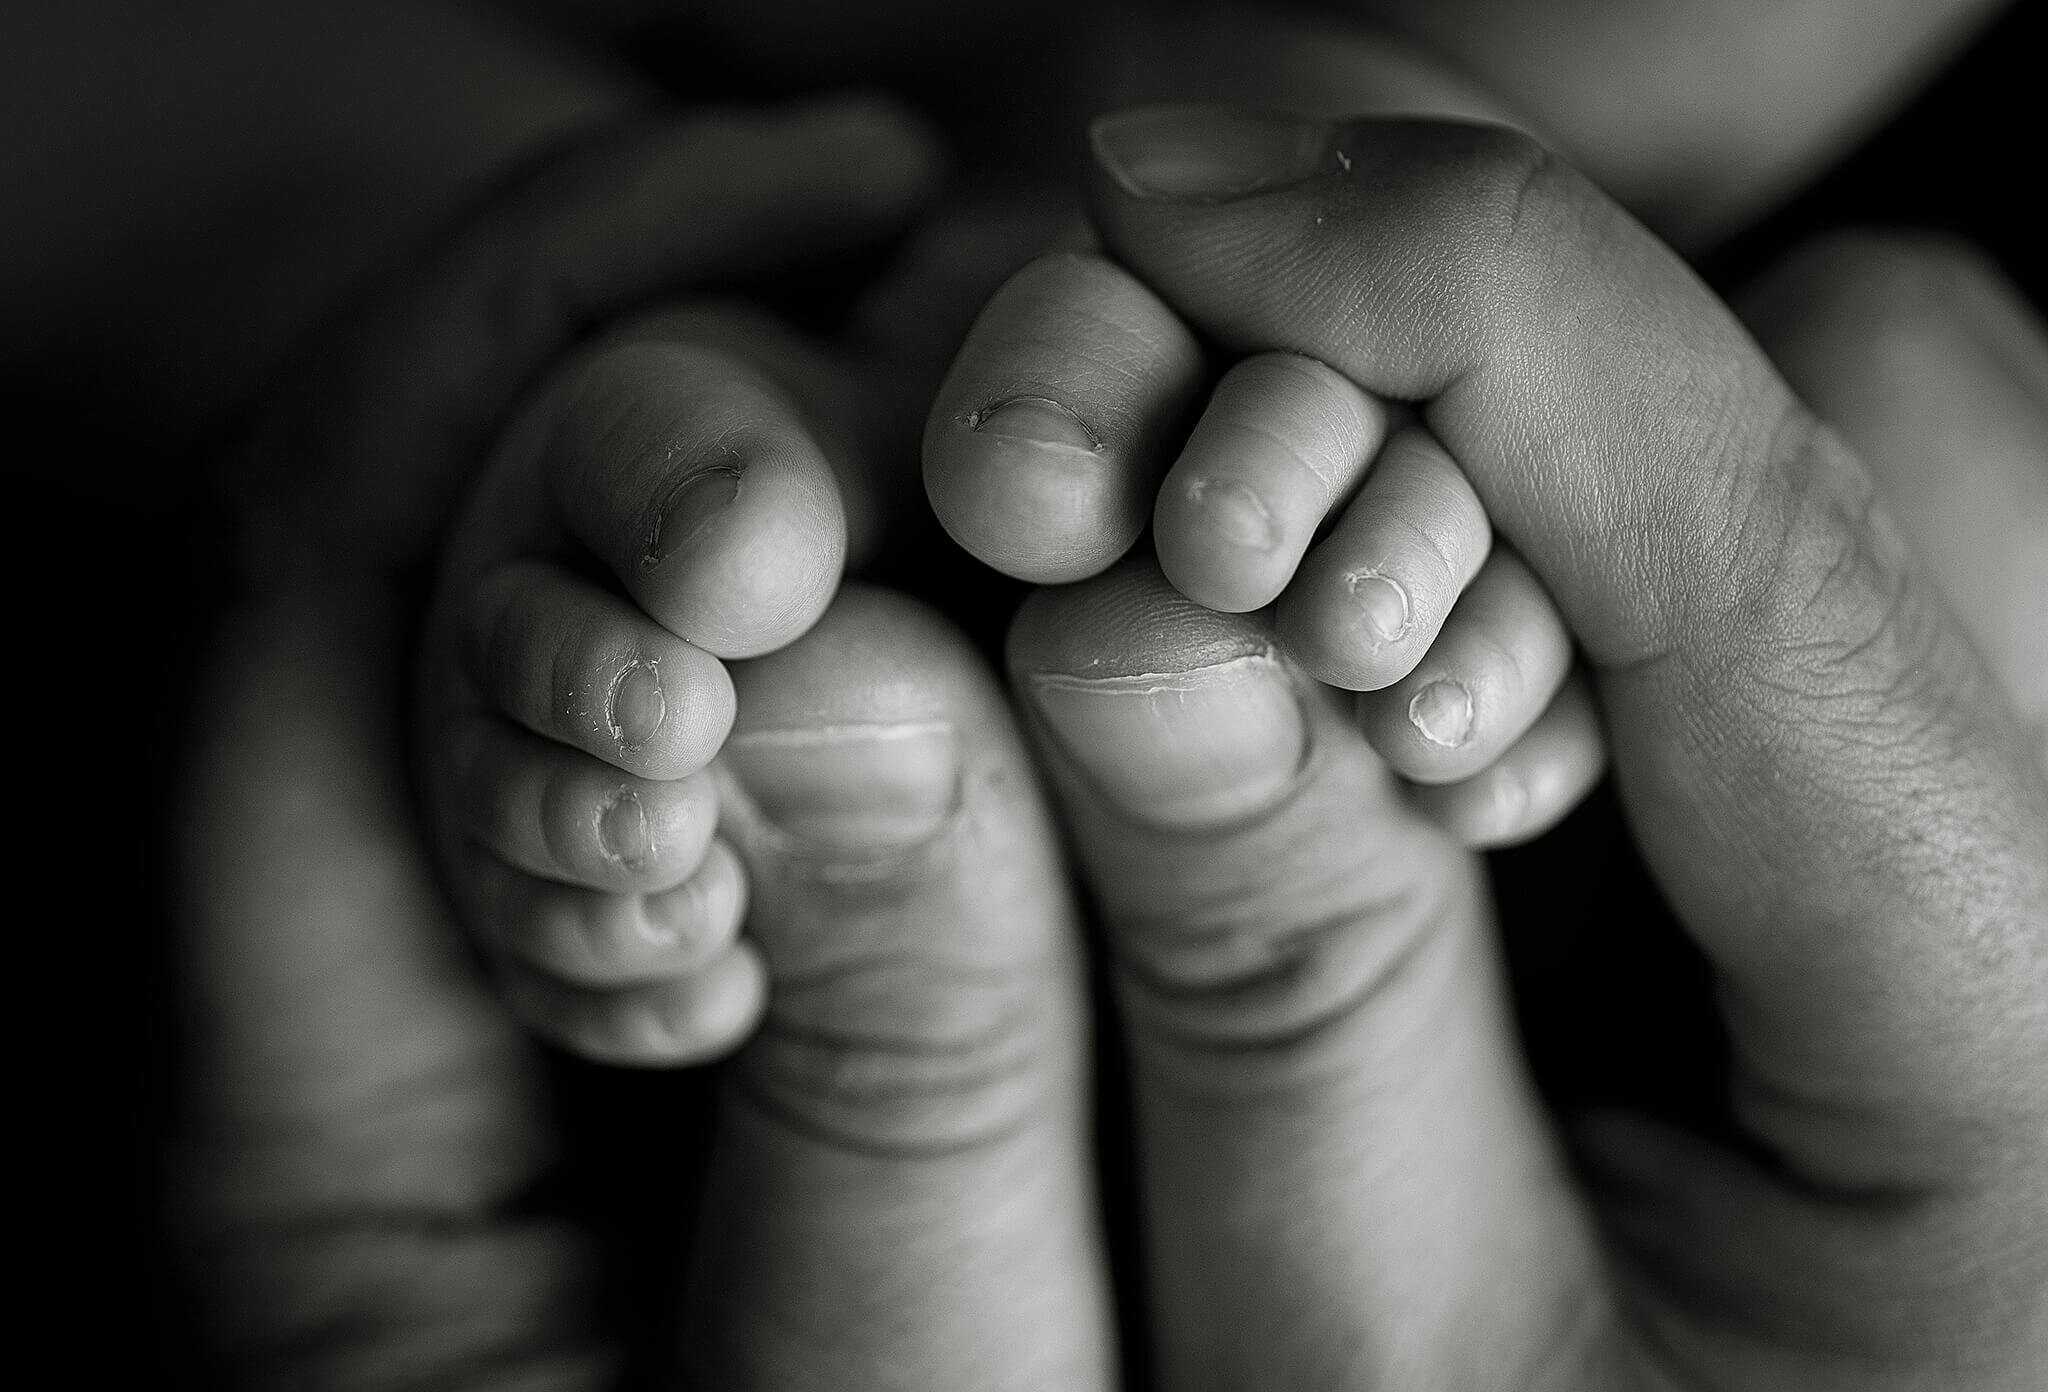 Black and white image of father holding newborn babies feet in his hands.